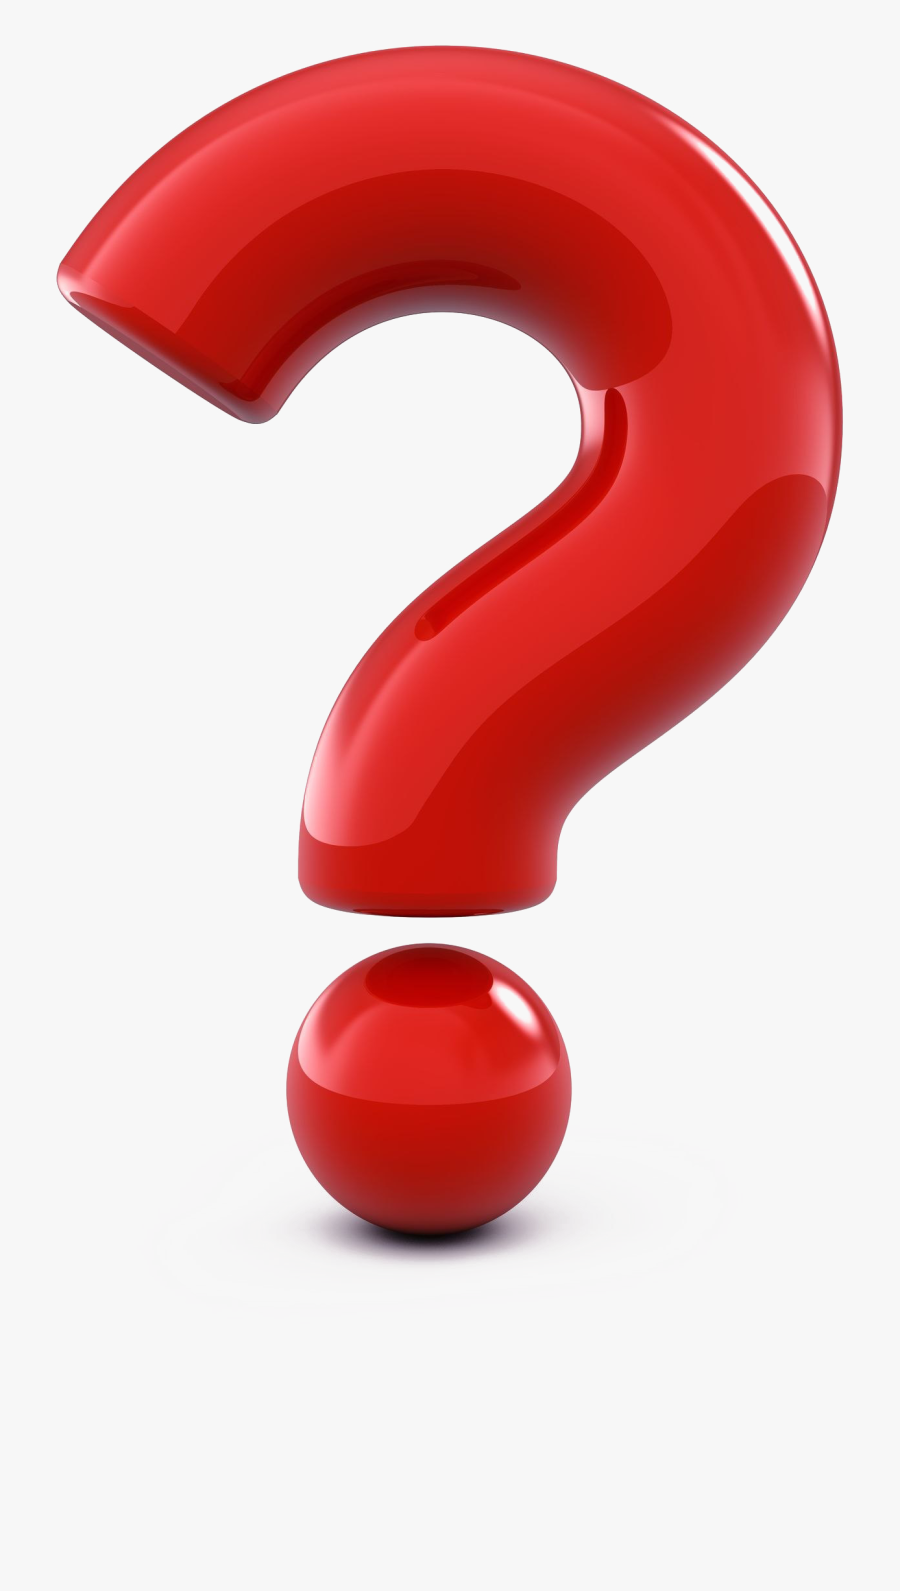 Question Mark Png Transparent Hd Photo - Big Red Question Mark, Transparent Clipart